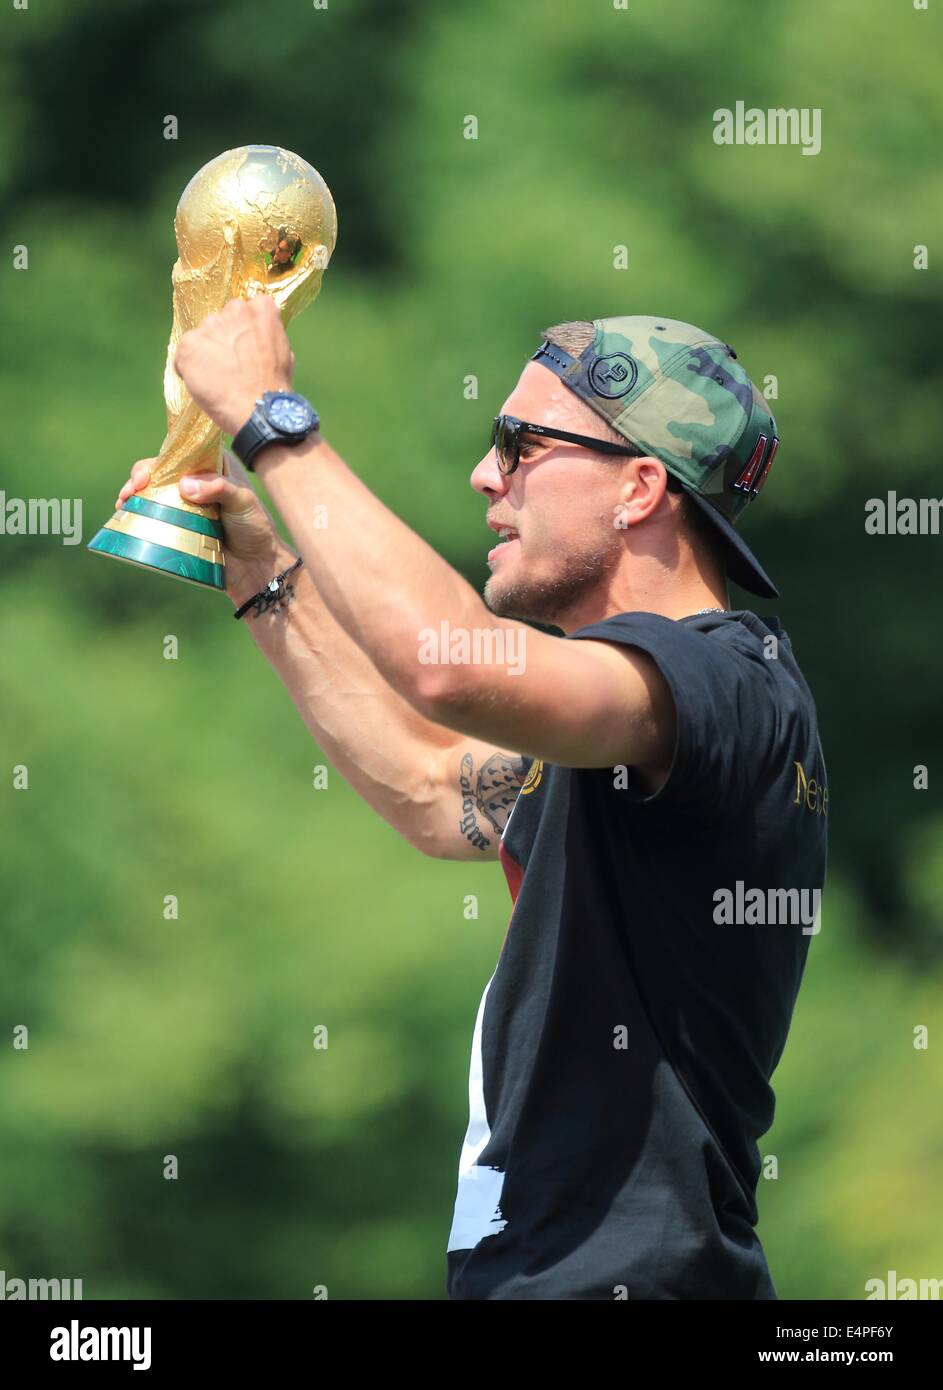 Germany's Lukas Poldolski stands on stage with the World Cup trophy in his hands as he cheers and celebrates during the welcome reception for Germany's national soccer team in front of the Brandenburg Gate, Berlin, Germany, 15 July 2014. The German team won the Brazil 2014 FIFA Soccer World Cup final against Argentina by 1-0 on 13 July 2014, winning the world cup title for the fourth time after 1954, 1974 and 1990. Photo: Jens Wolf/dpa Stock Photo